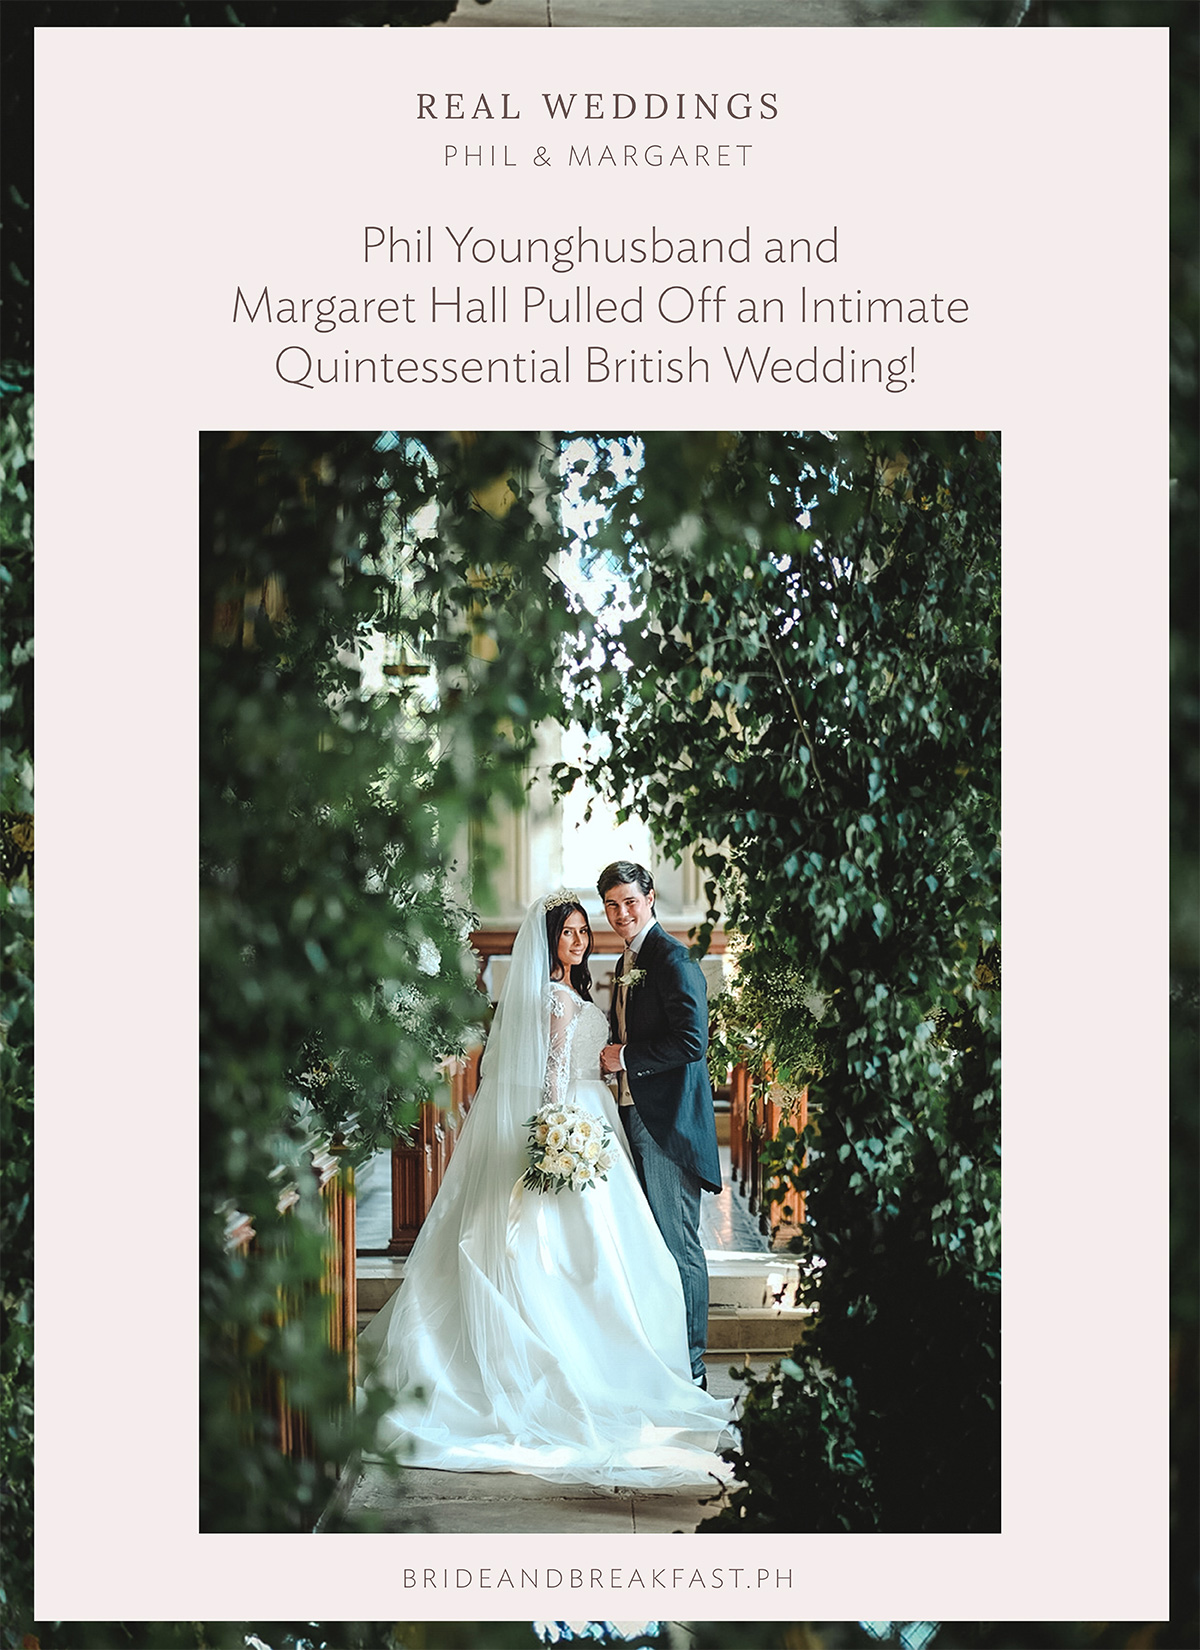 Phil Younghusband and Margaret Hall Pulled Off an Intimate Quintessential British Wedding!